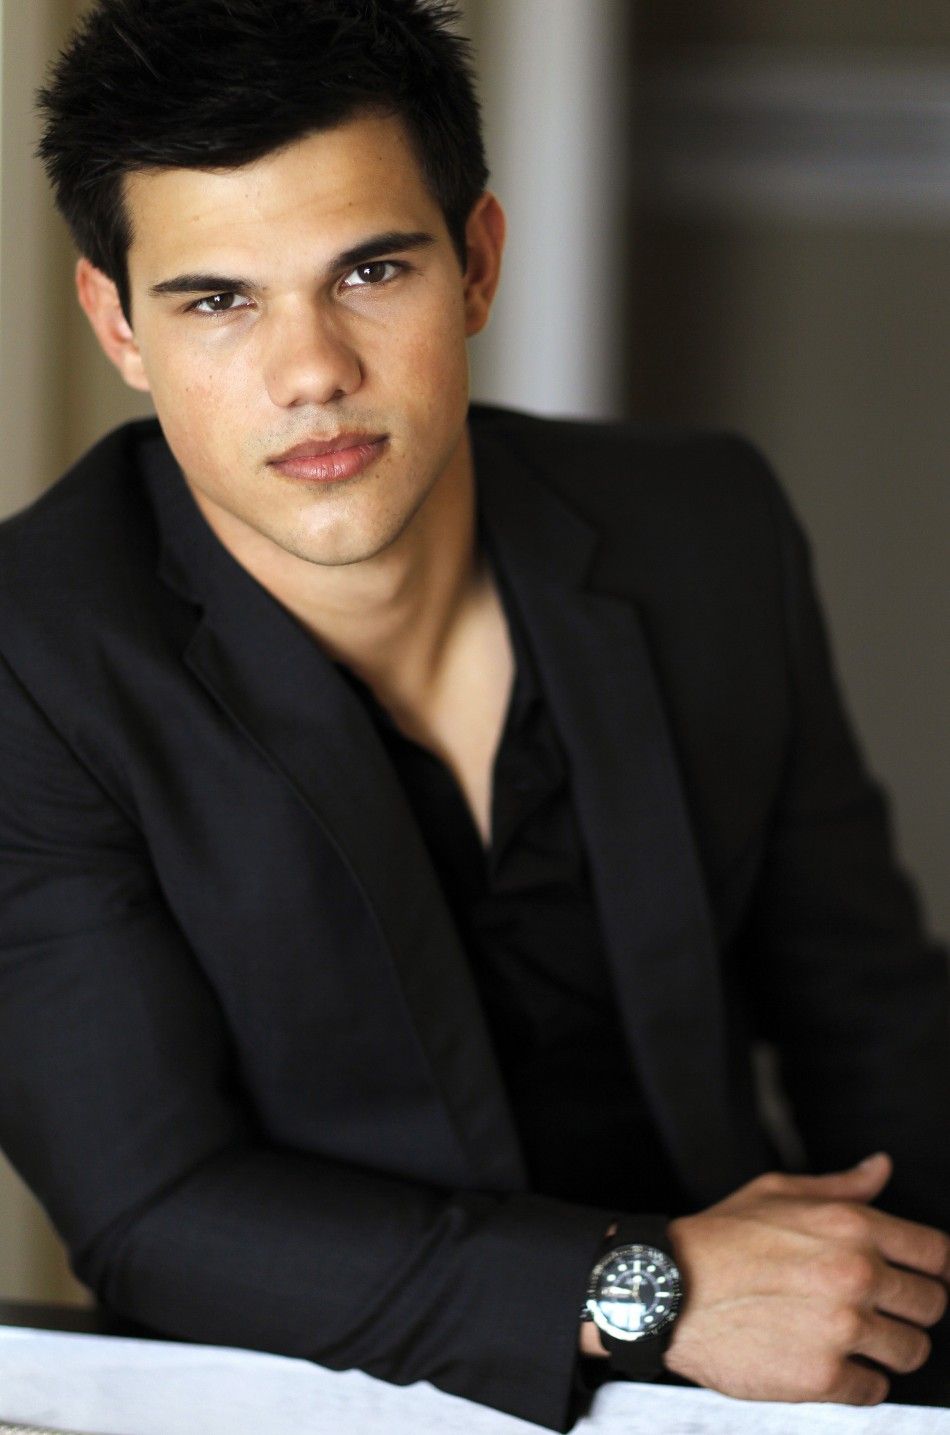 Taylor Lautner, who stars in the upcoming movie quotThe Twilight Saga Eclipse,quot poses for a portrait in Los Angeles